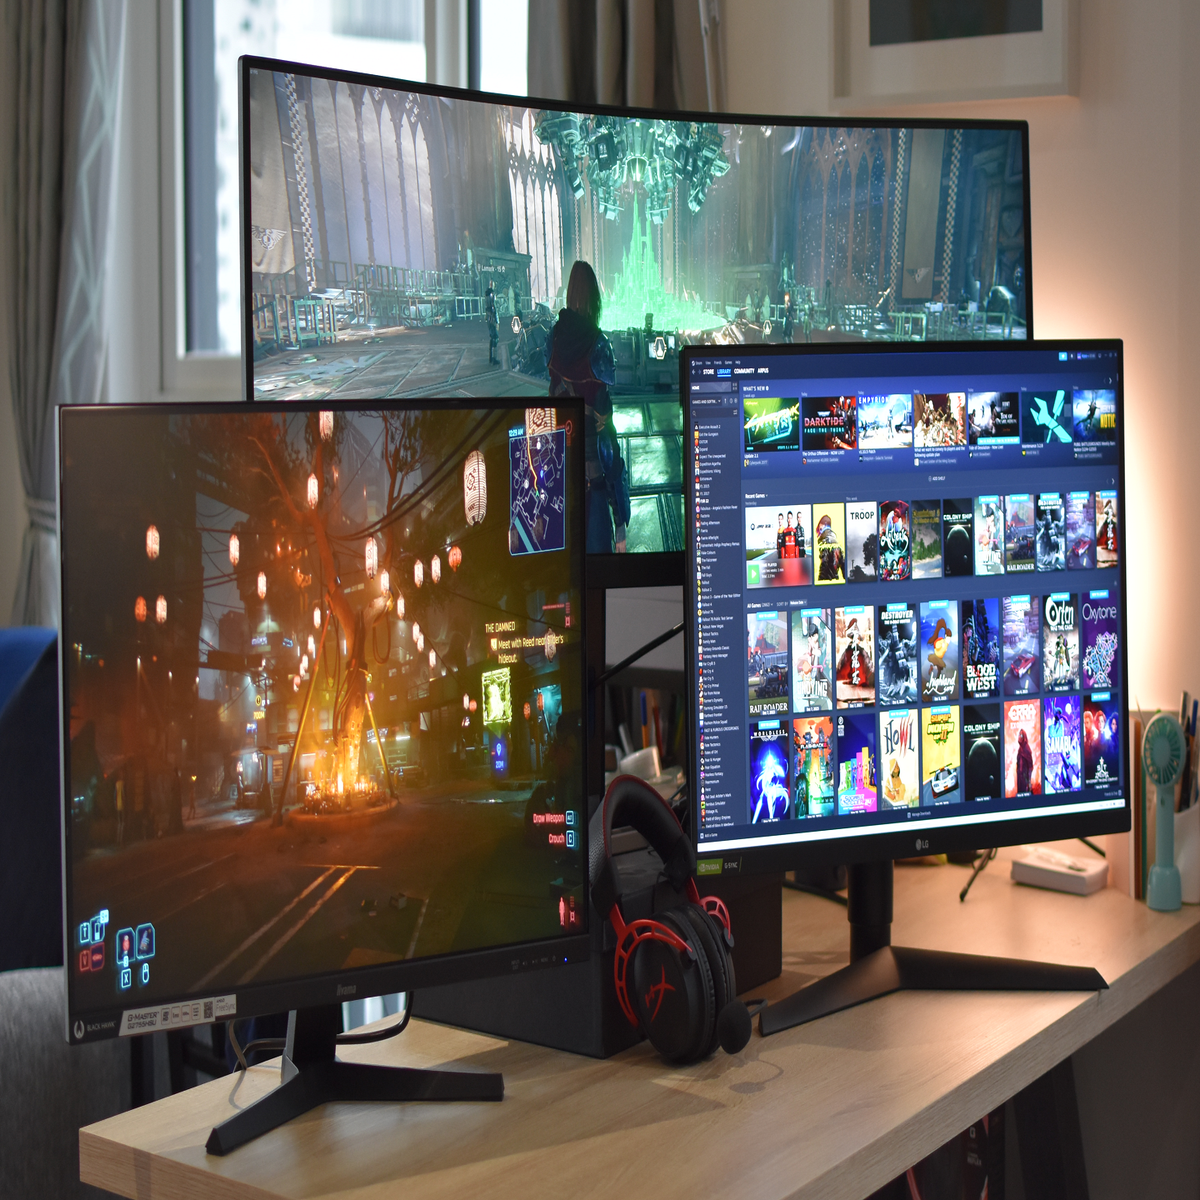 BenQ Mobiuz EX3410R review: Pushing prices down